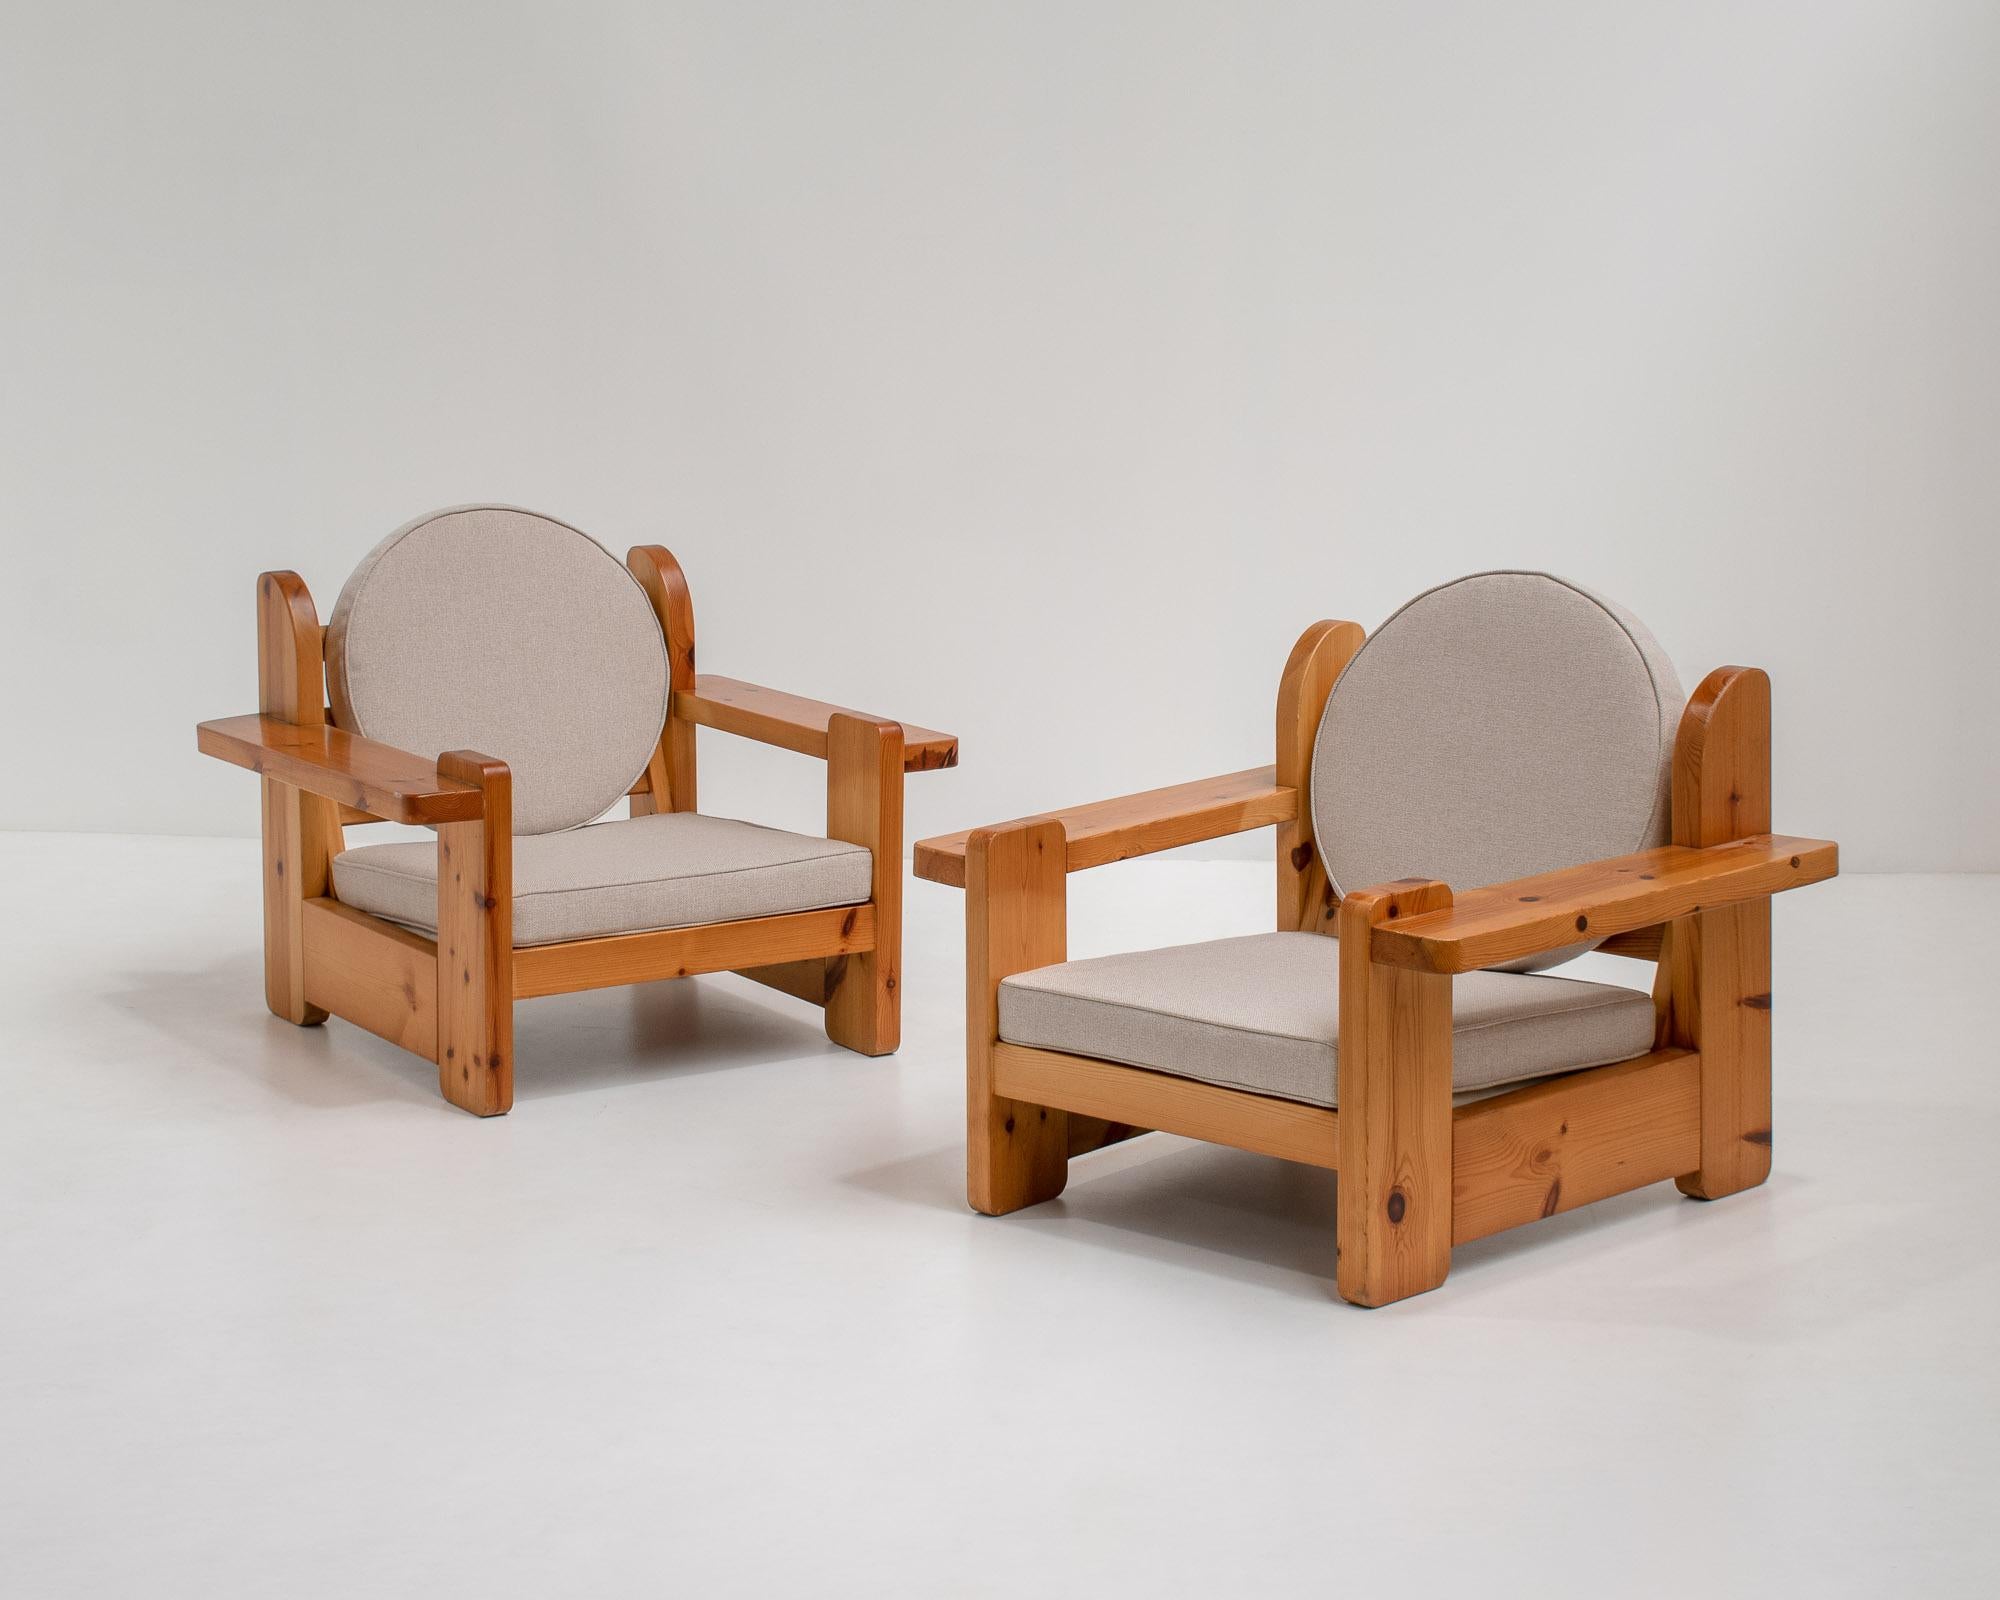 Pair of Solid Pine Sculptural Lounge Chairs, Italy, 1970s For Sale 4